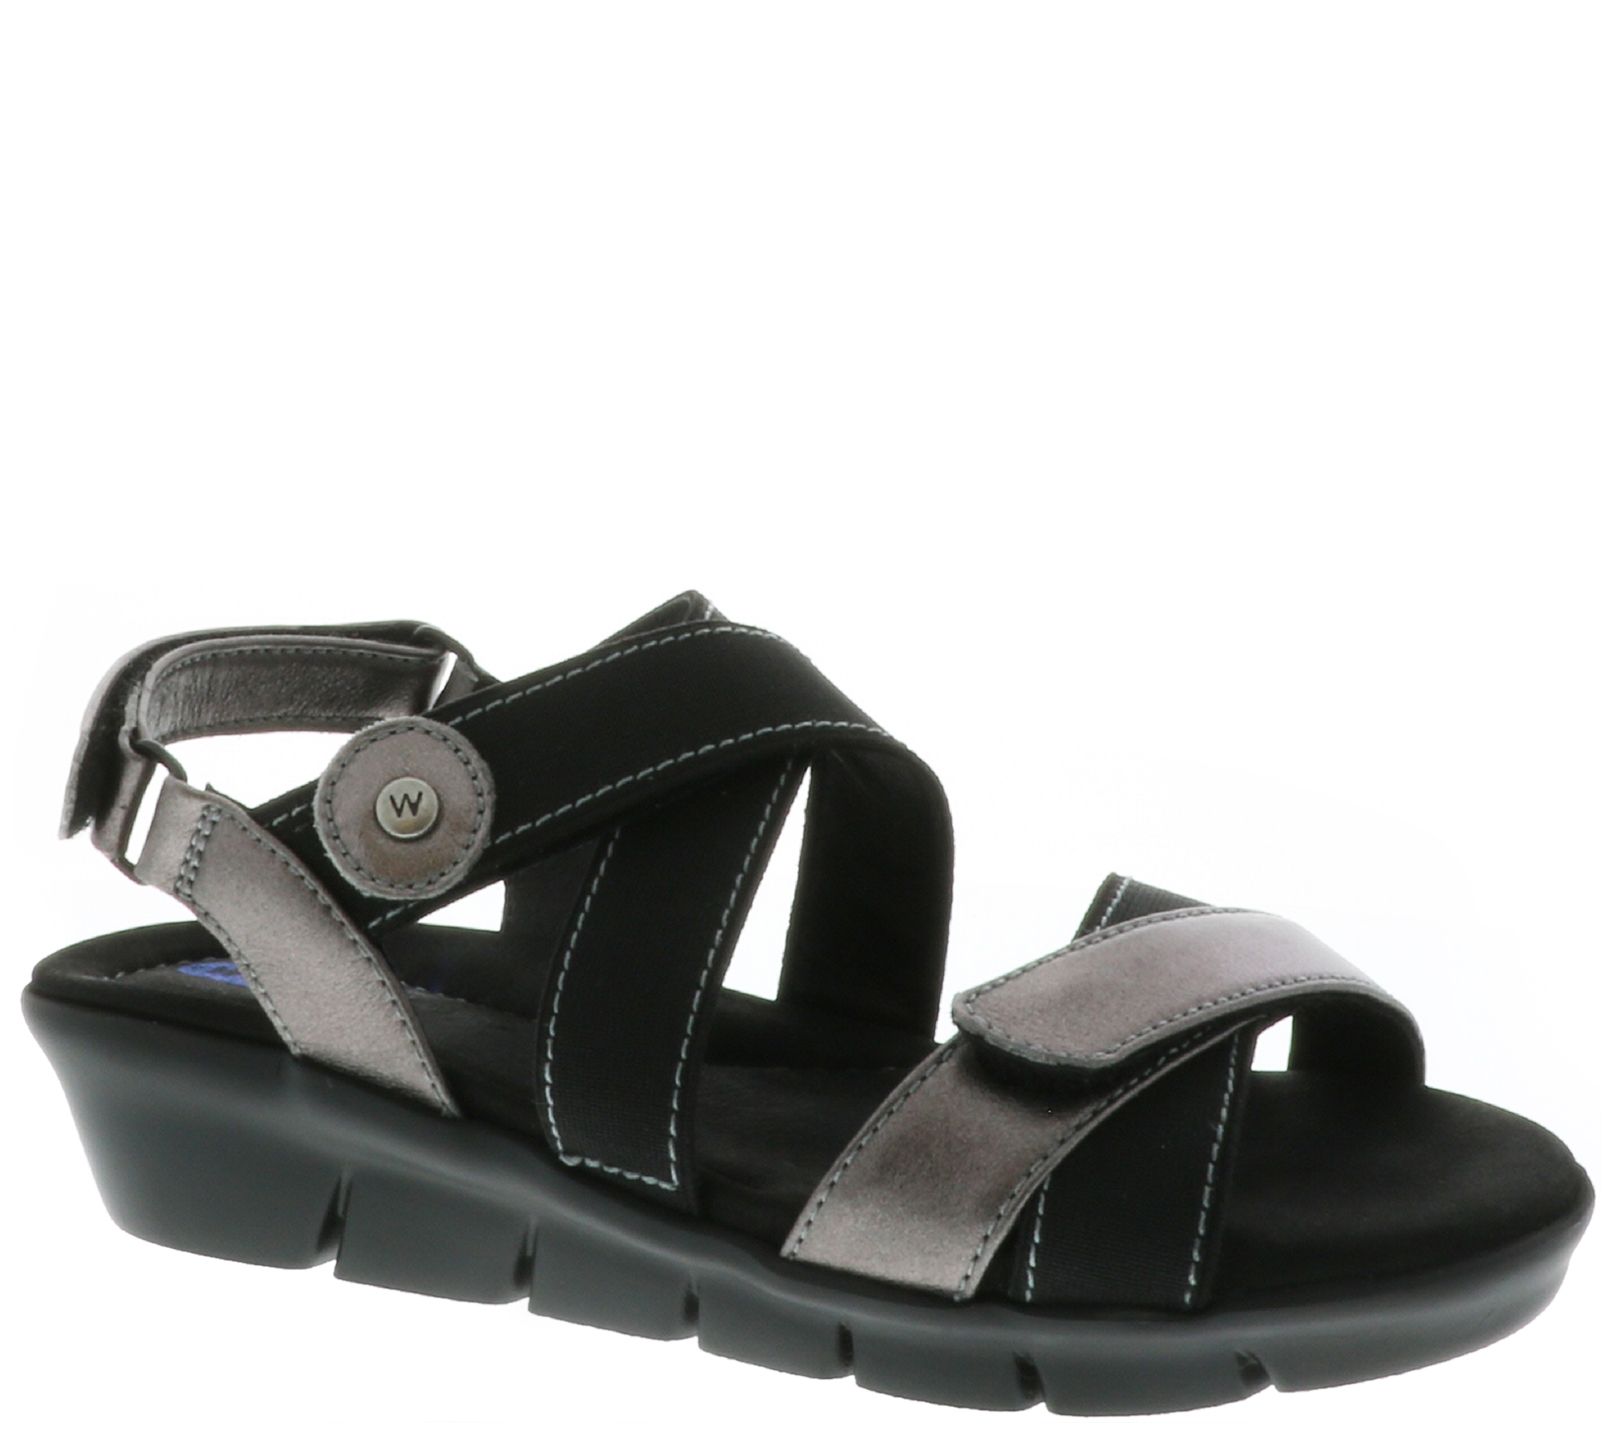 Wolky Sandals - Electra - QVC.com